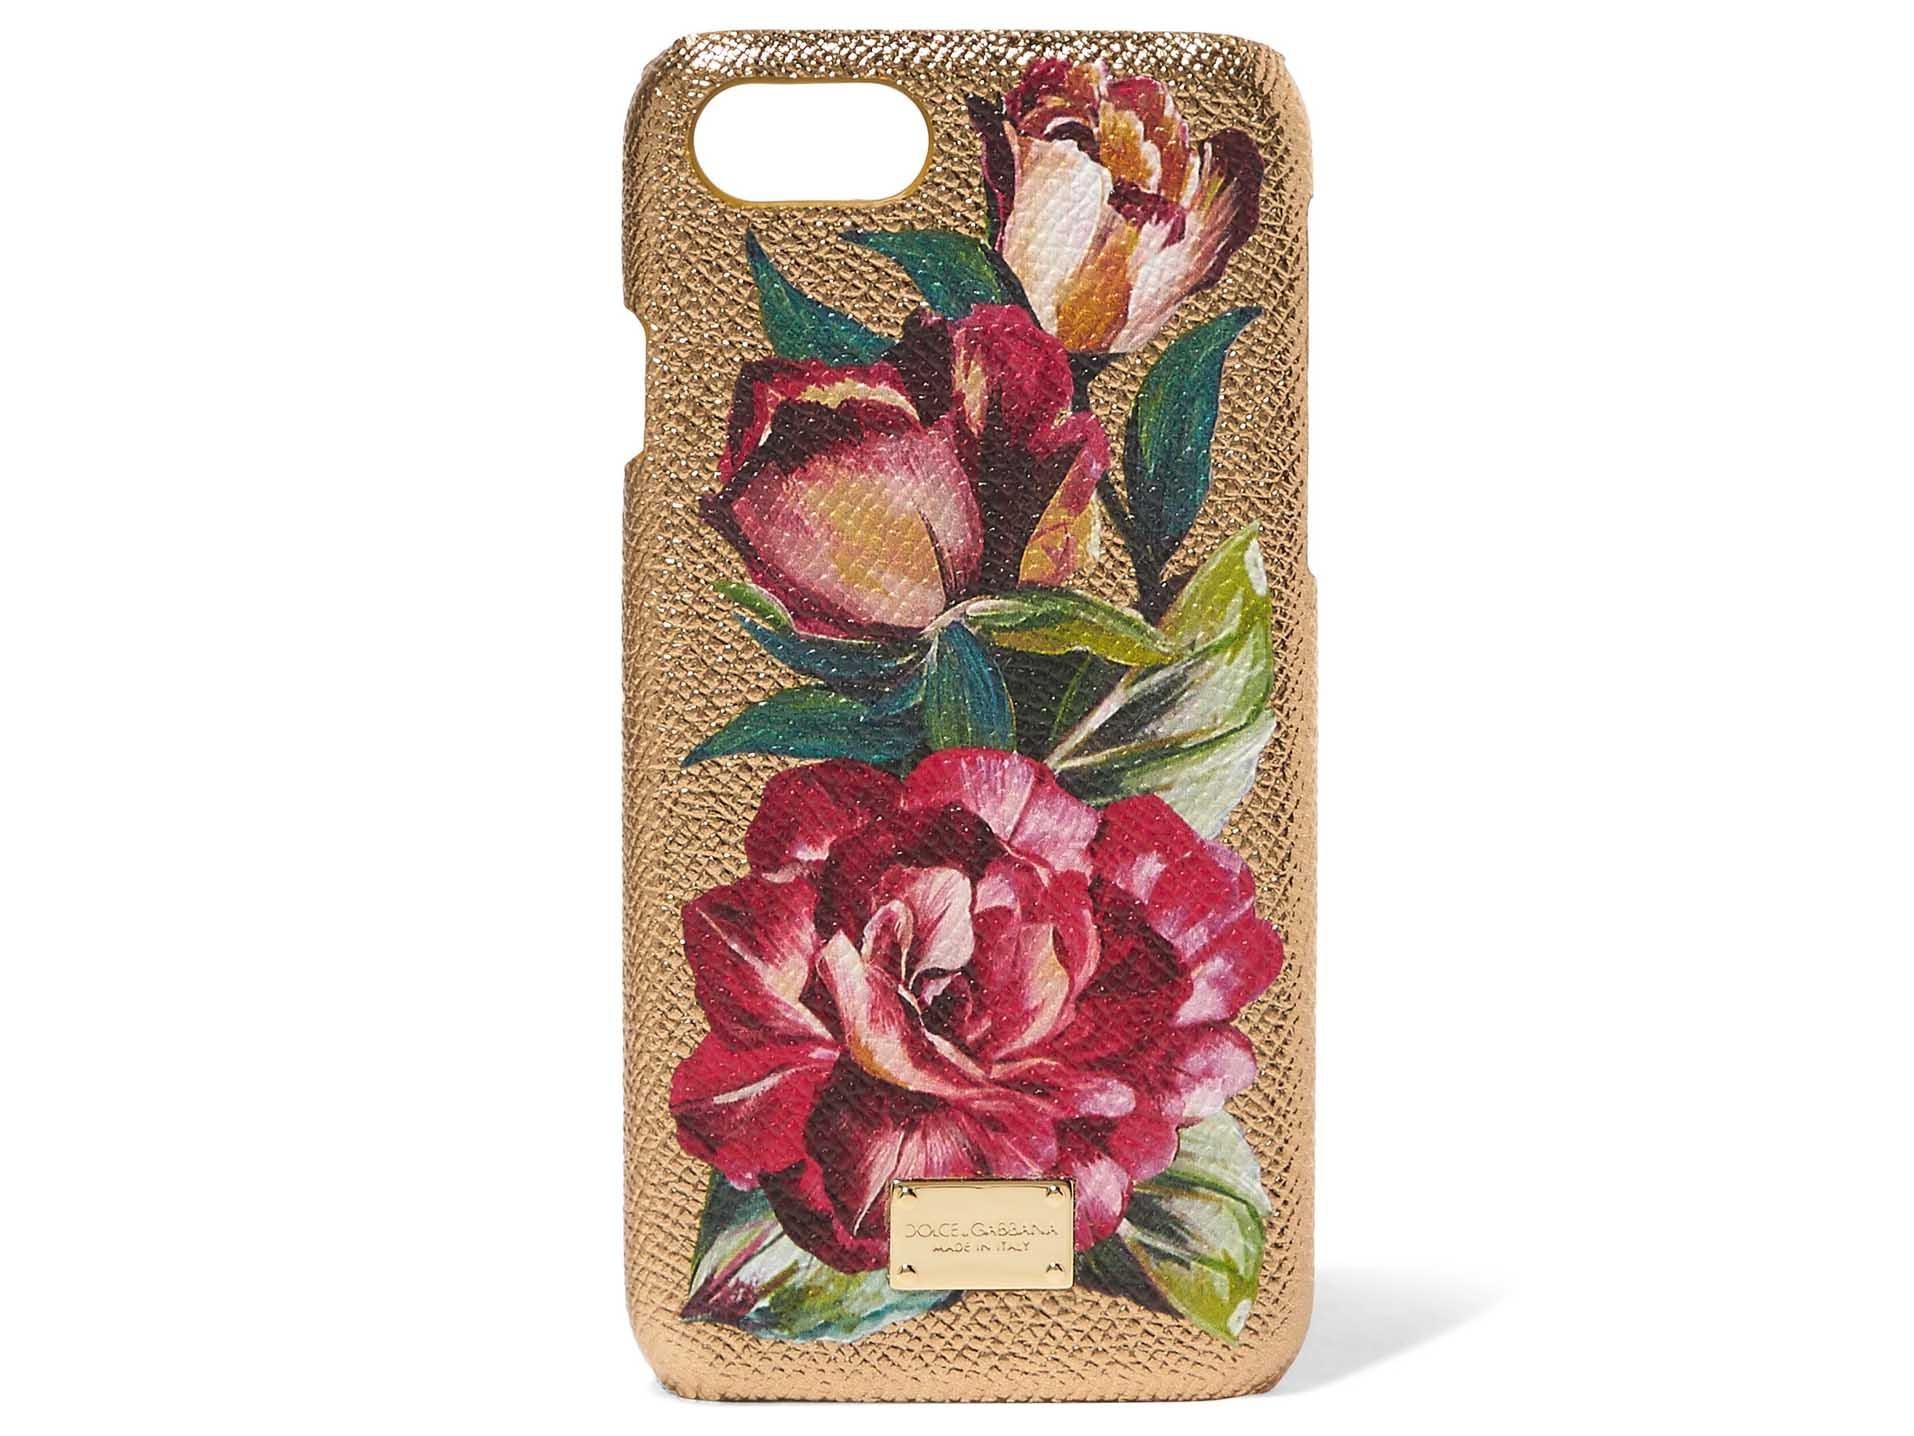 Dolce &amp; Gabbana, Textured-Leather Floral-Print iPhone 7 Case, £215, Net-a-Porter